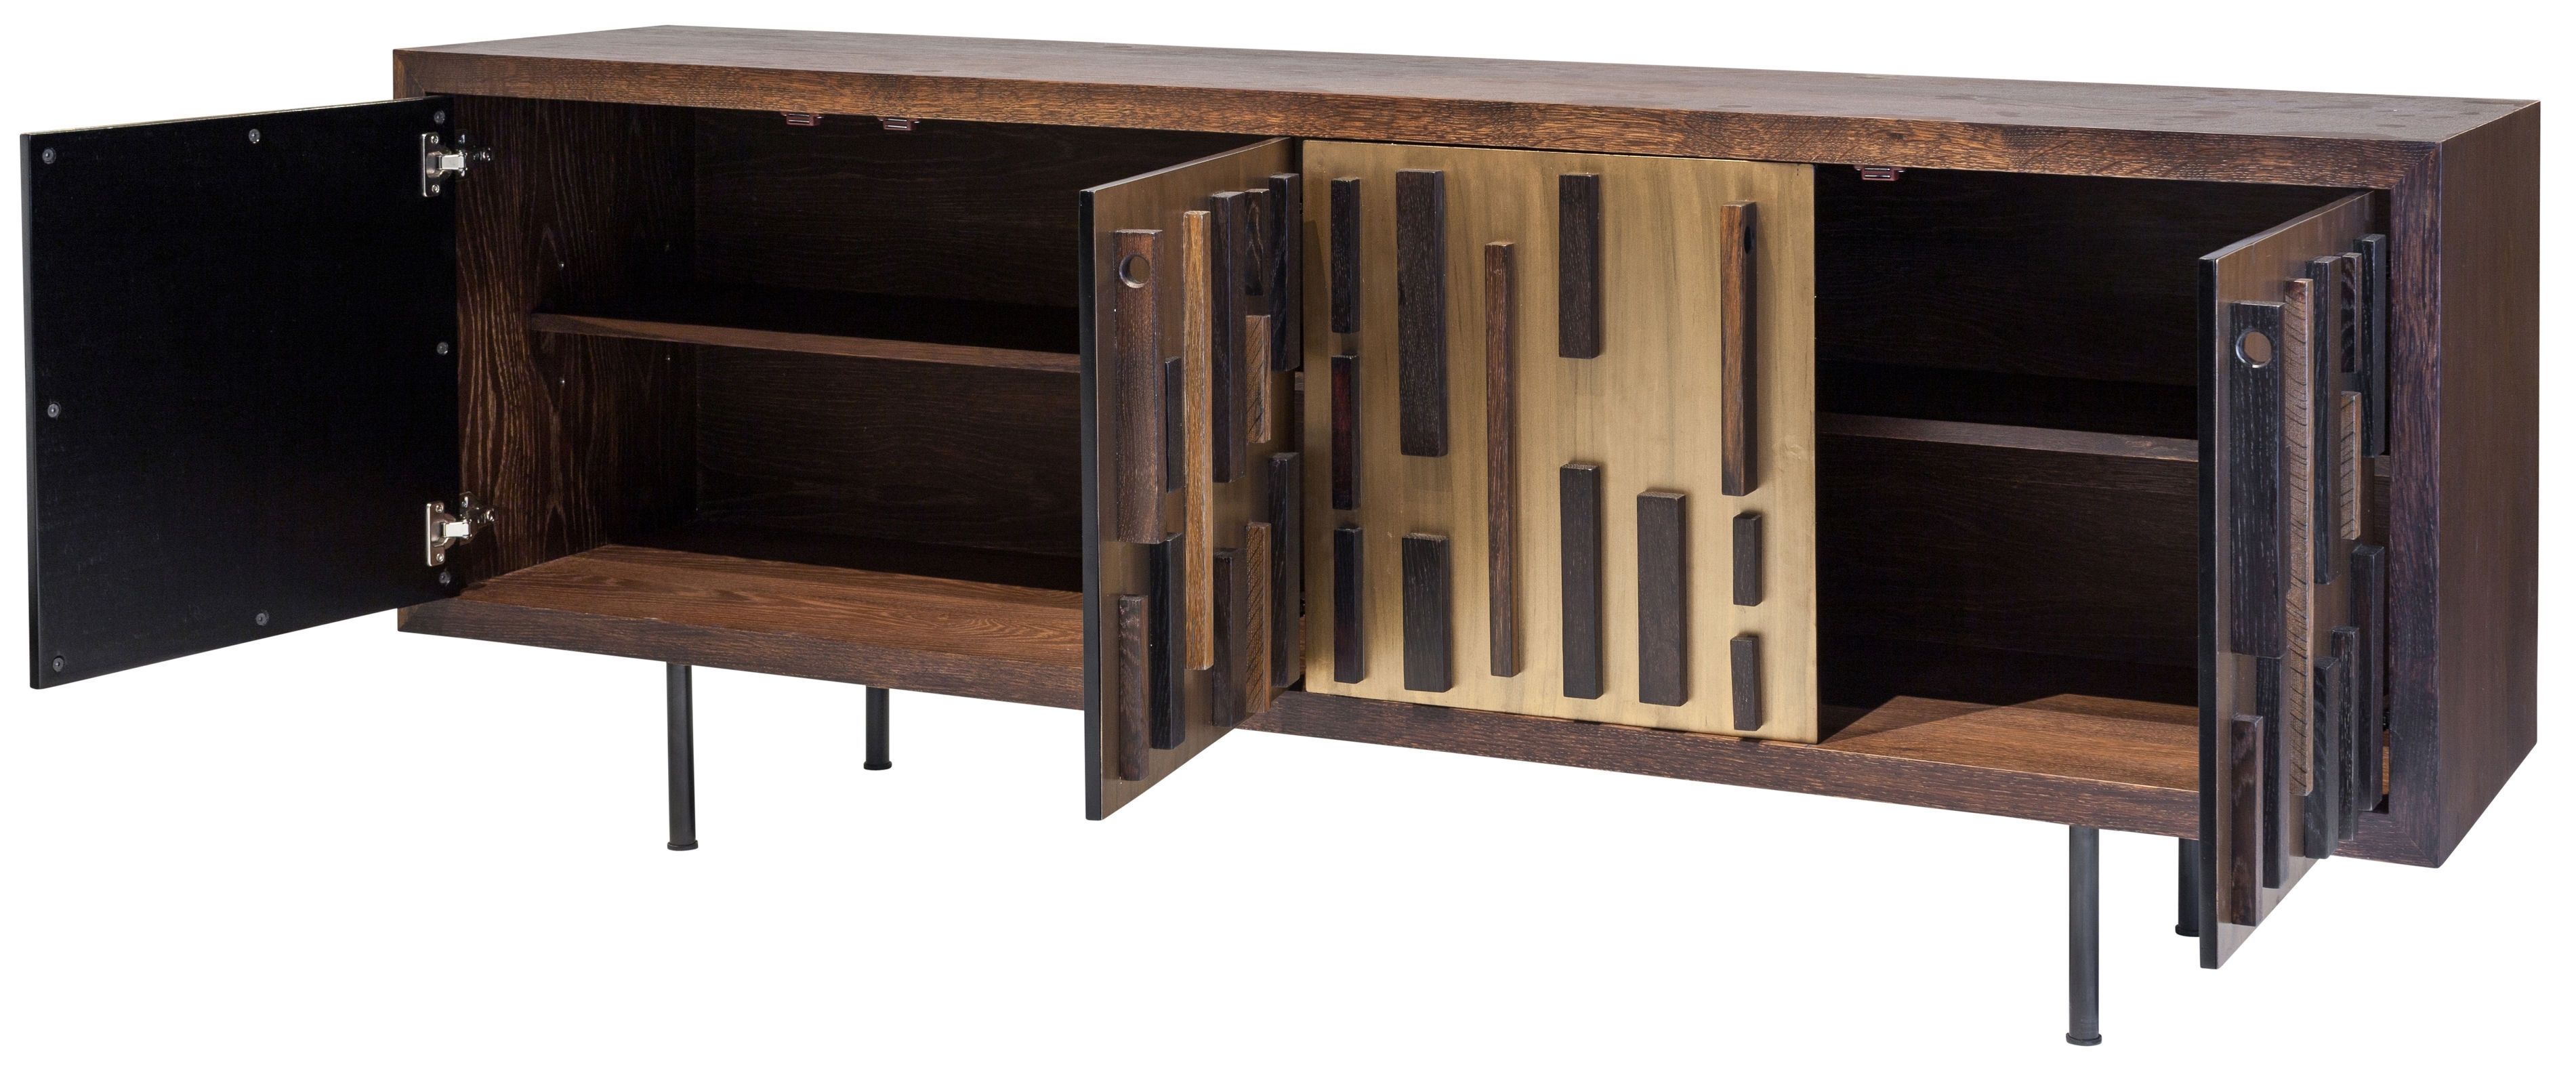 Blok Buffet Sideboard In Seared Oak And Black Cast Iron Legs (wide Intended For Current Black Oak Wood And Wrought Iron Sideboards (View 1 of 20)